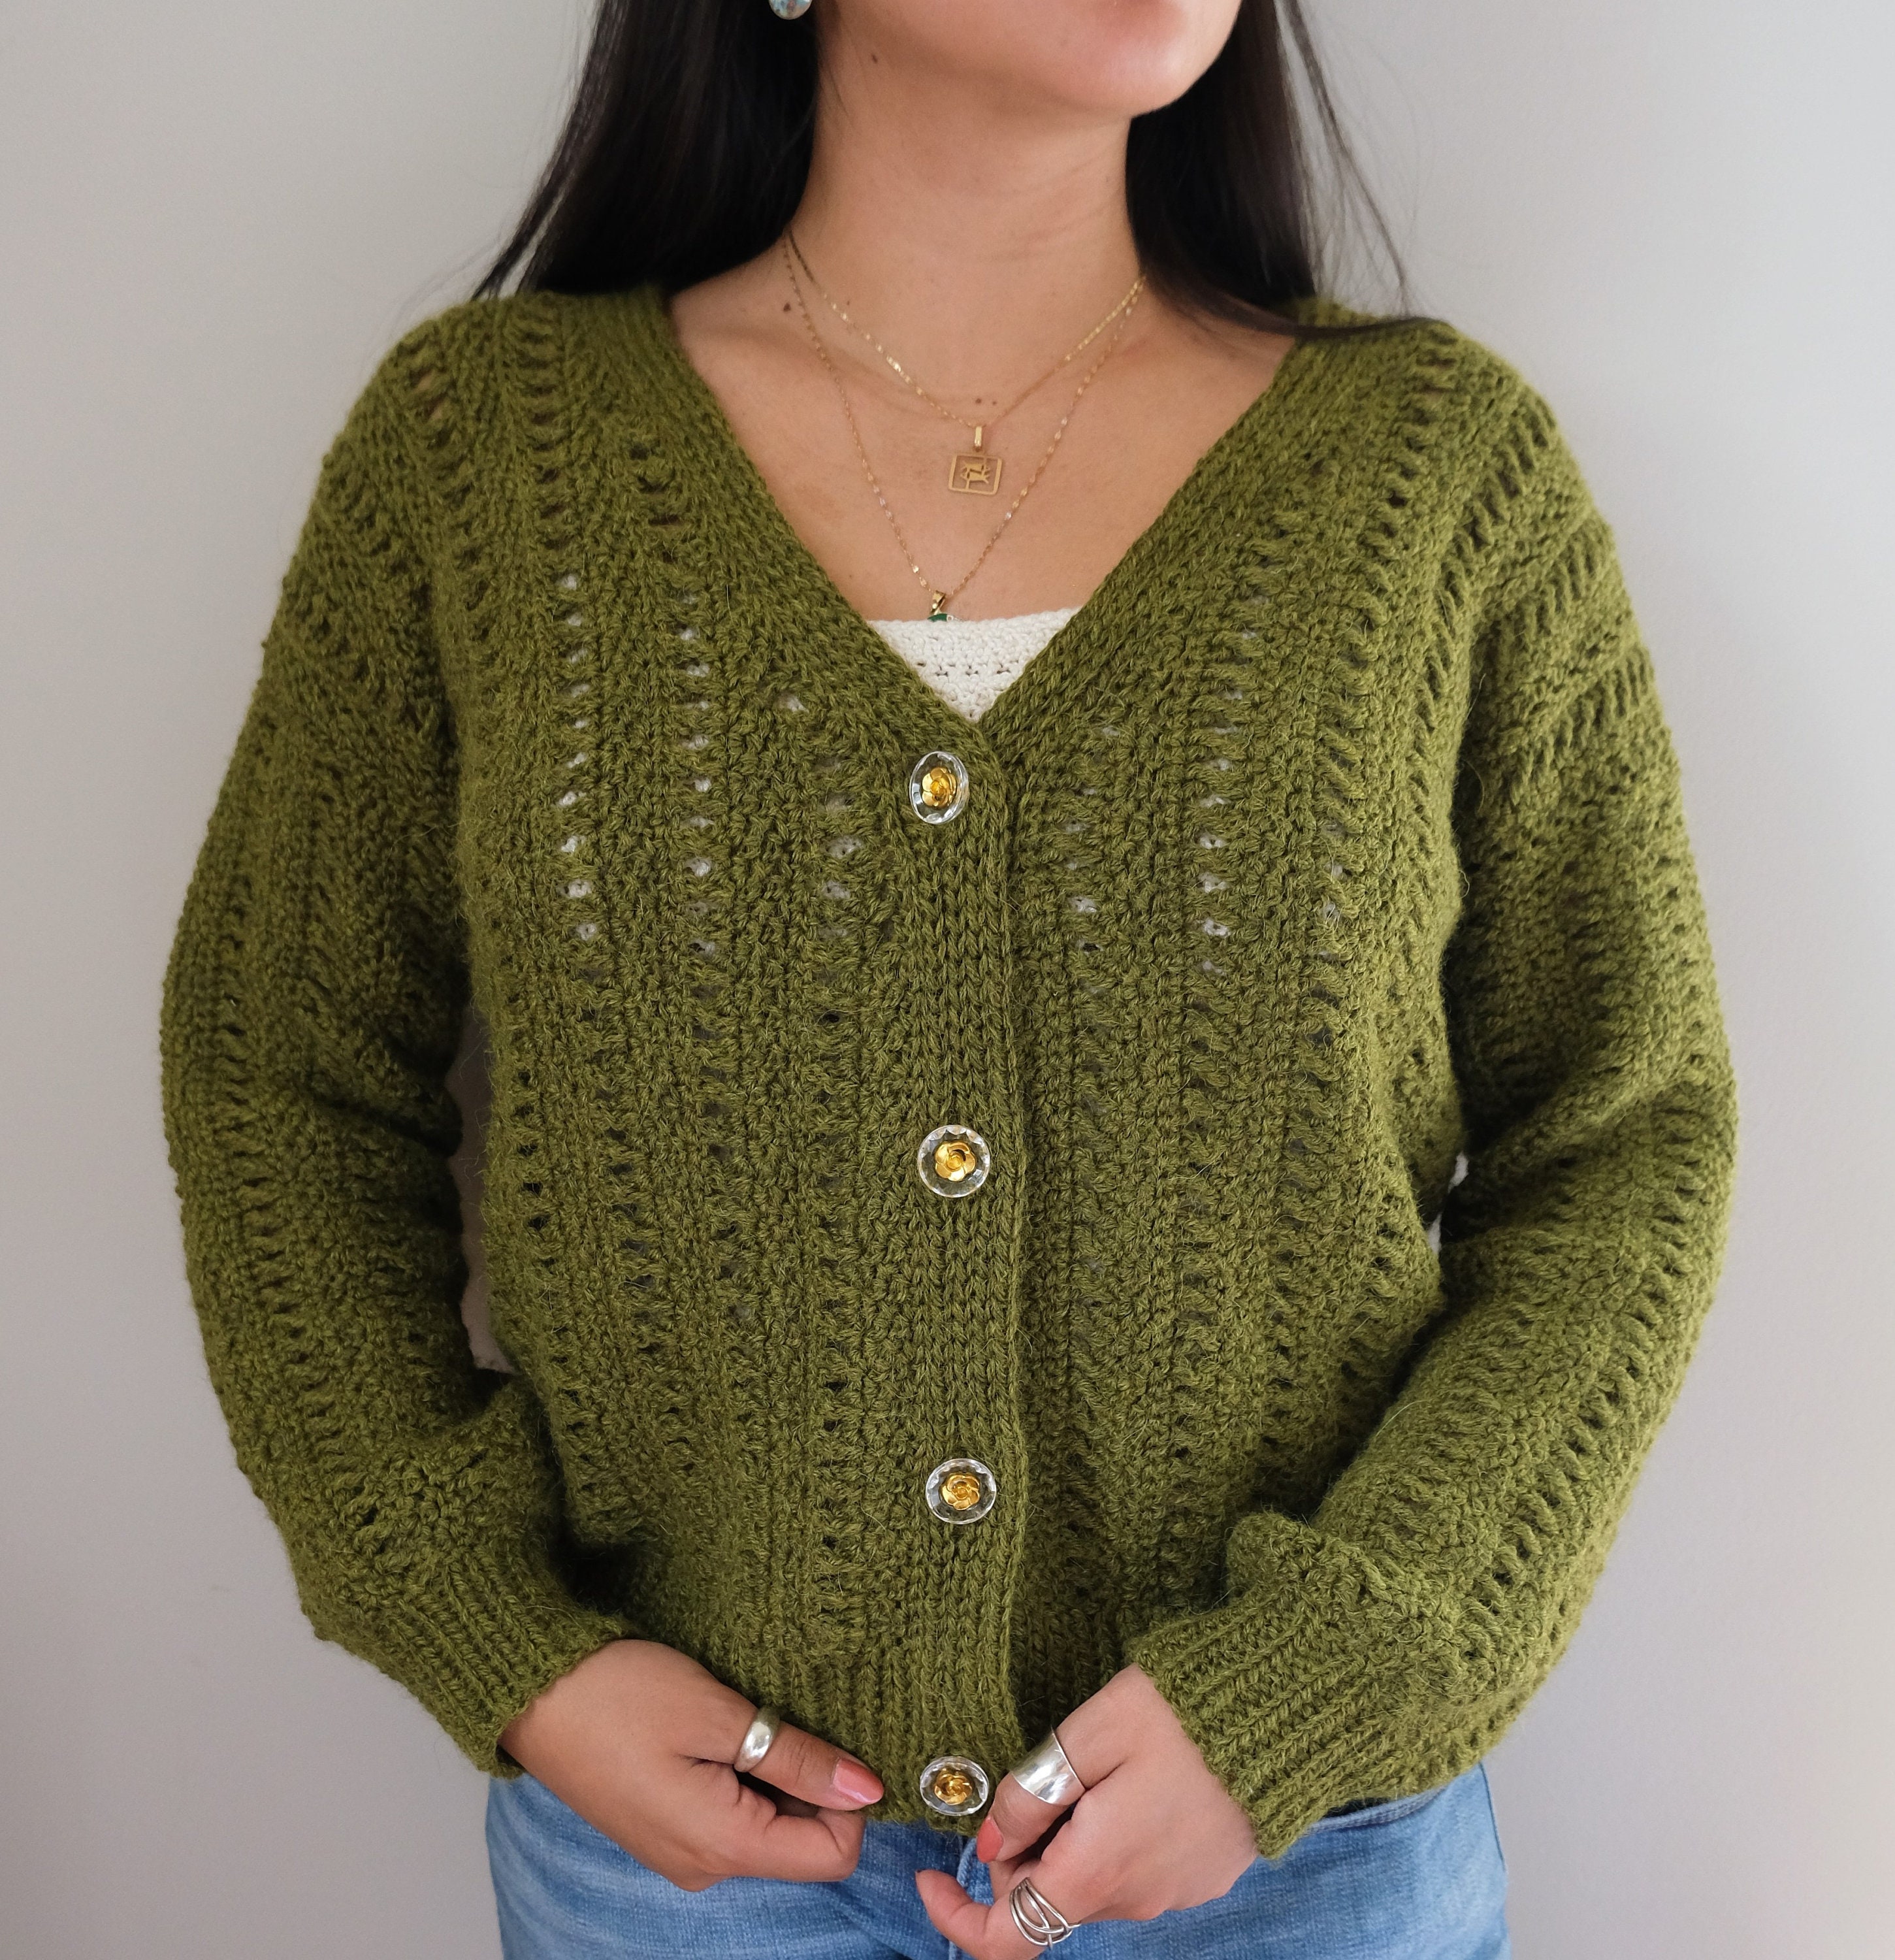 KNITTING FOR OLIVE on Instagram: Sally Sweater 🫶🏼 The sweater